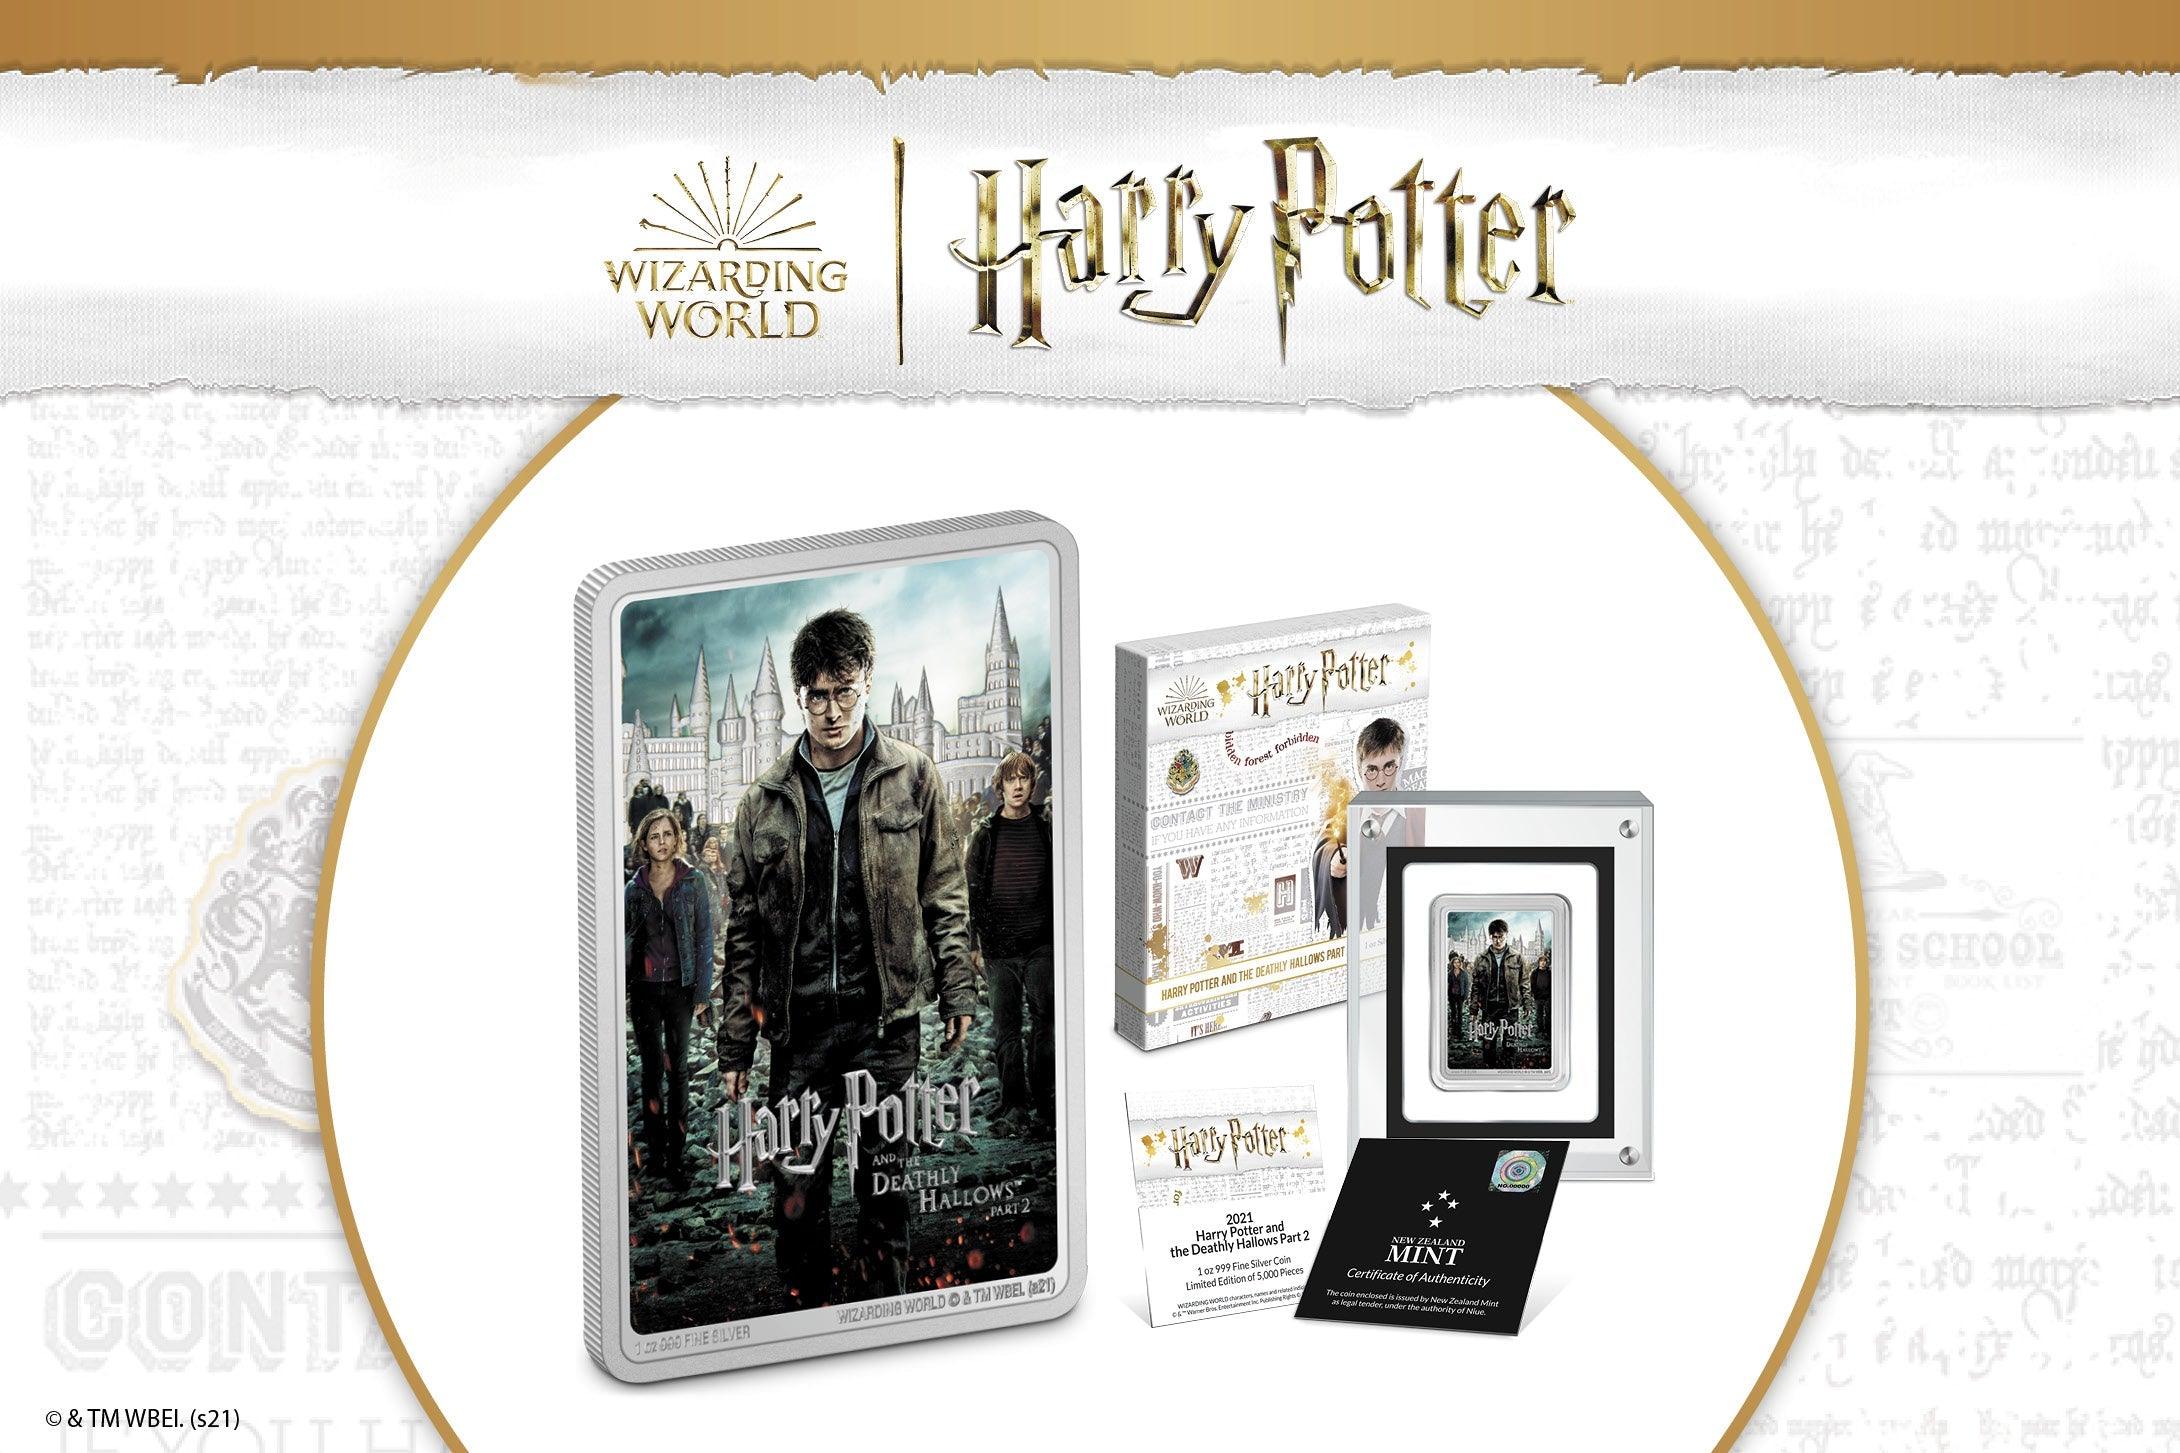 Complete your Collection with Harry Potter and the Deathly Hallows